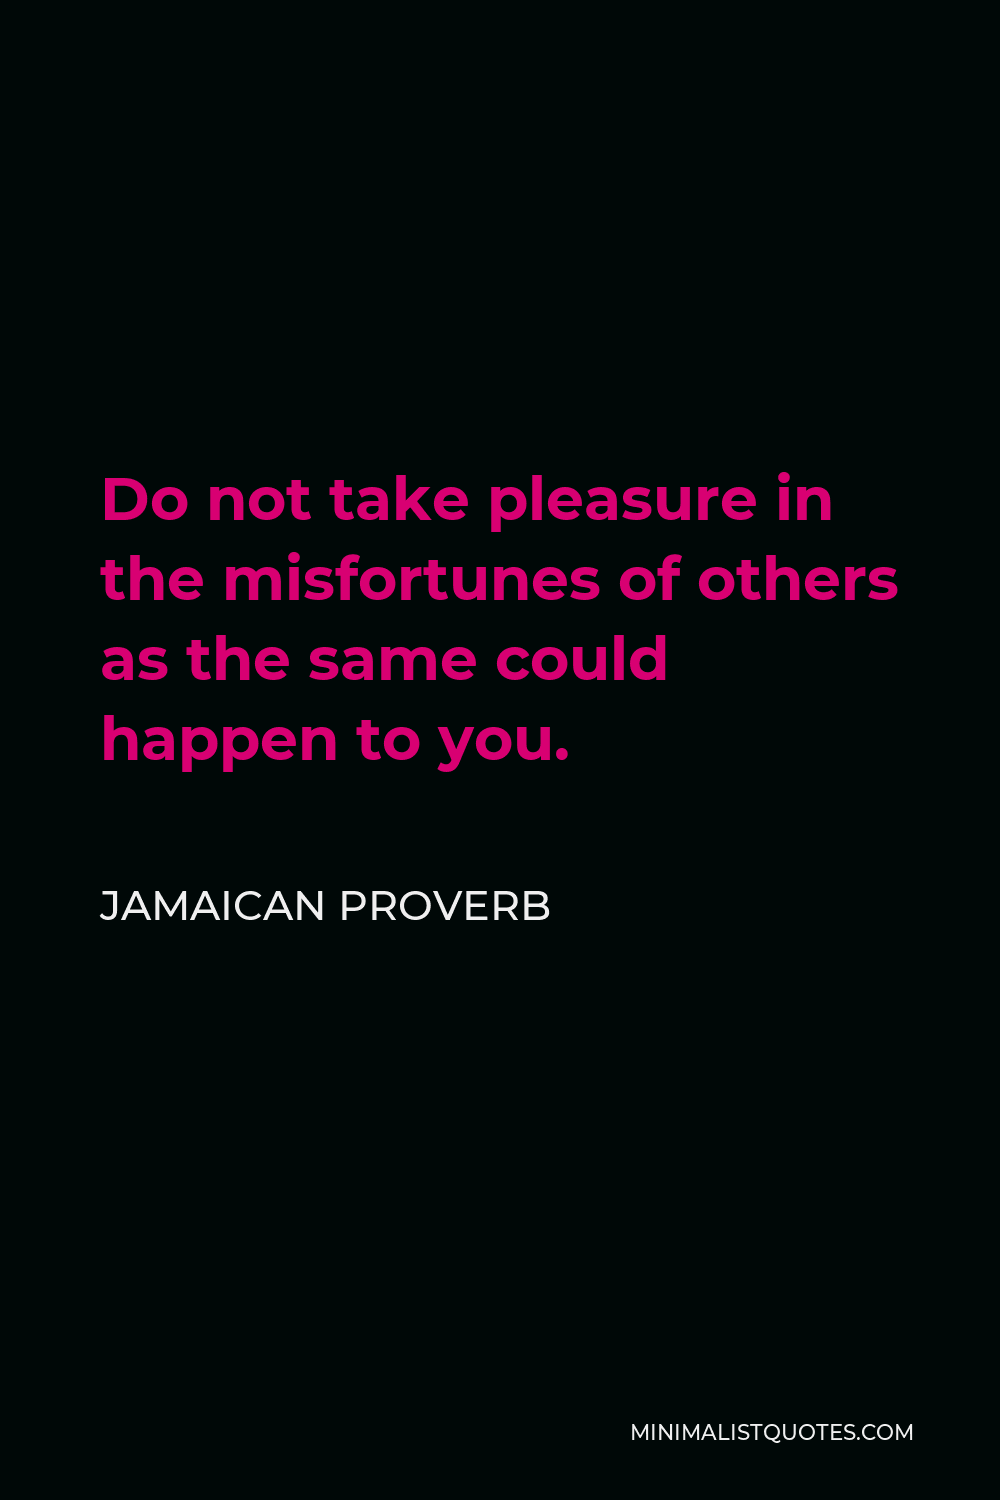 Jamaican Proverb Quote - Do not take pleasure in the misfortunes of others as the same could happen to you.